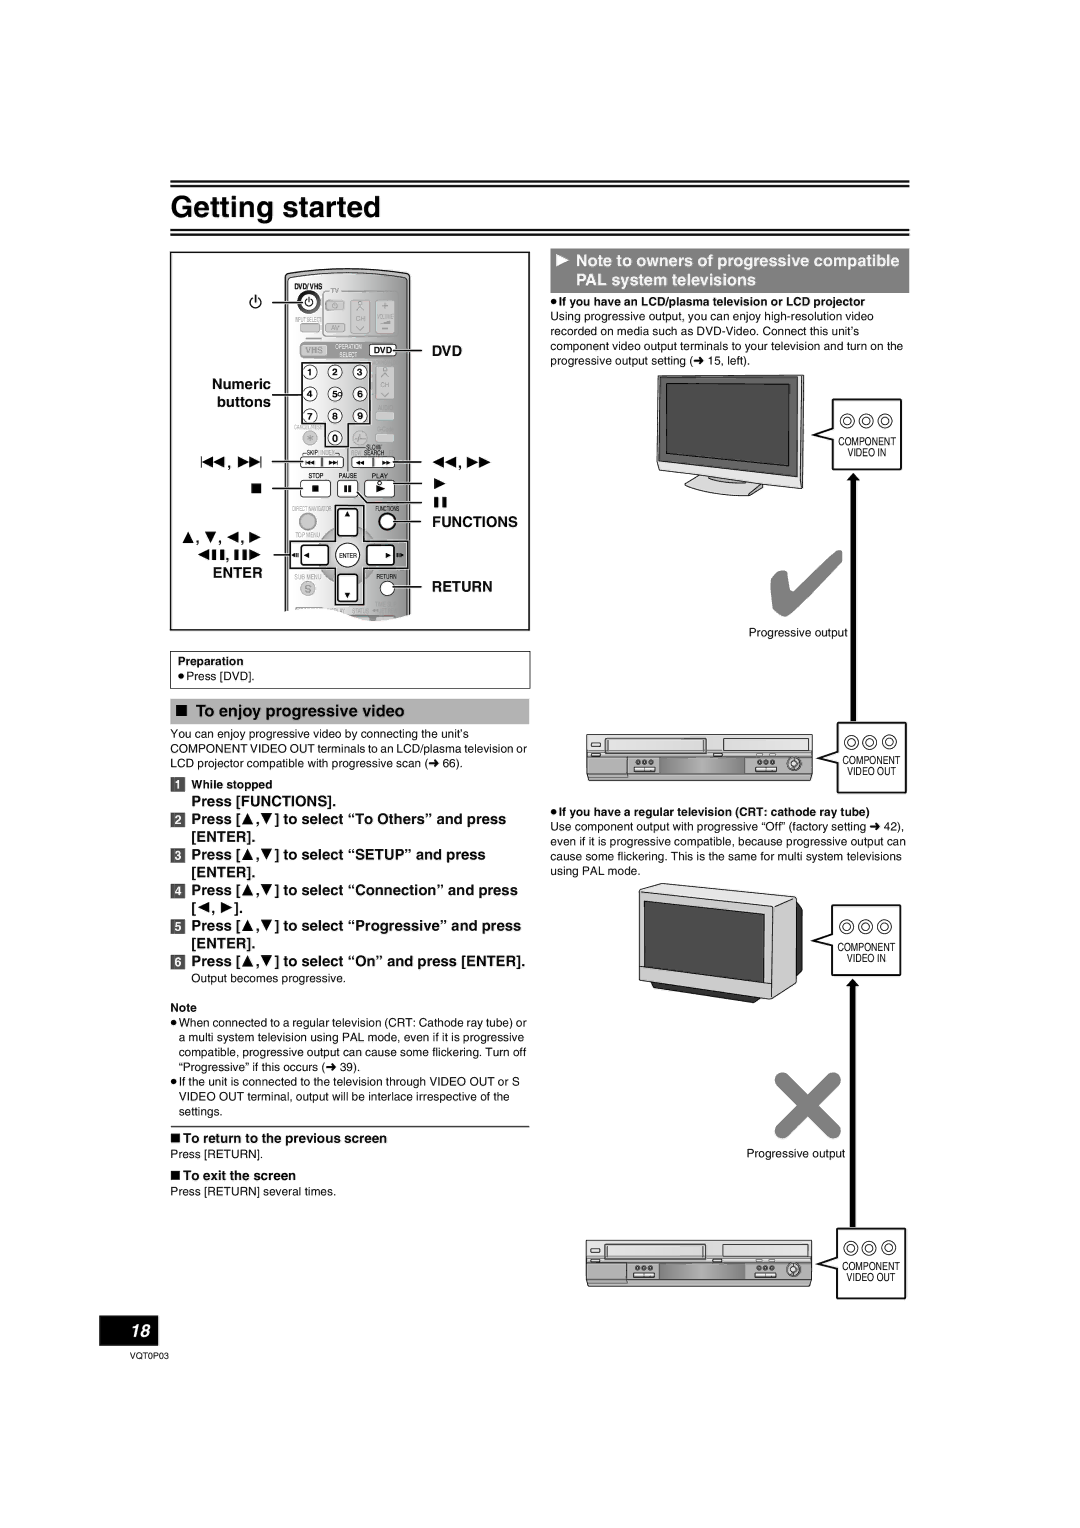 Panasonic DMR-ES30V PAL system televisions, To enjoy progressive video, To return to the previous screen 